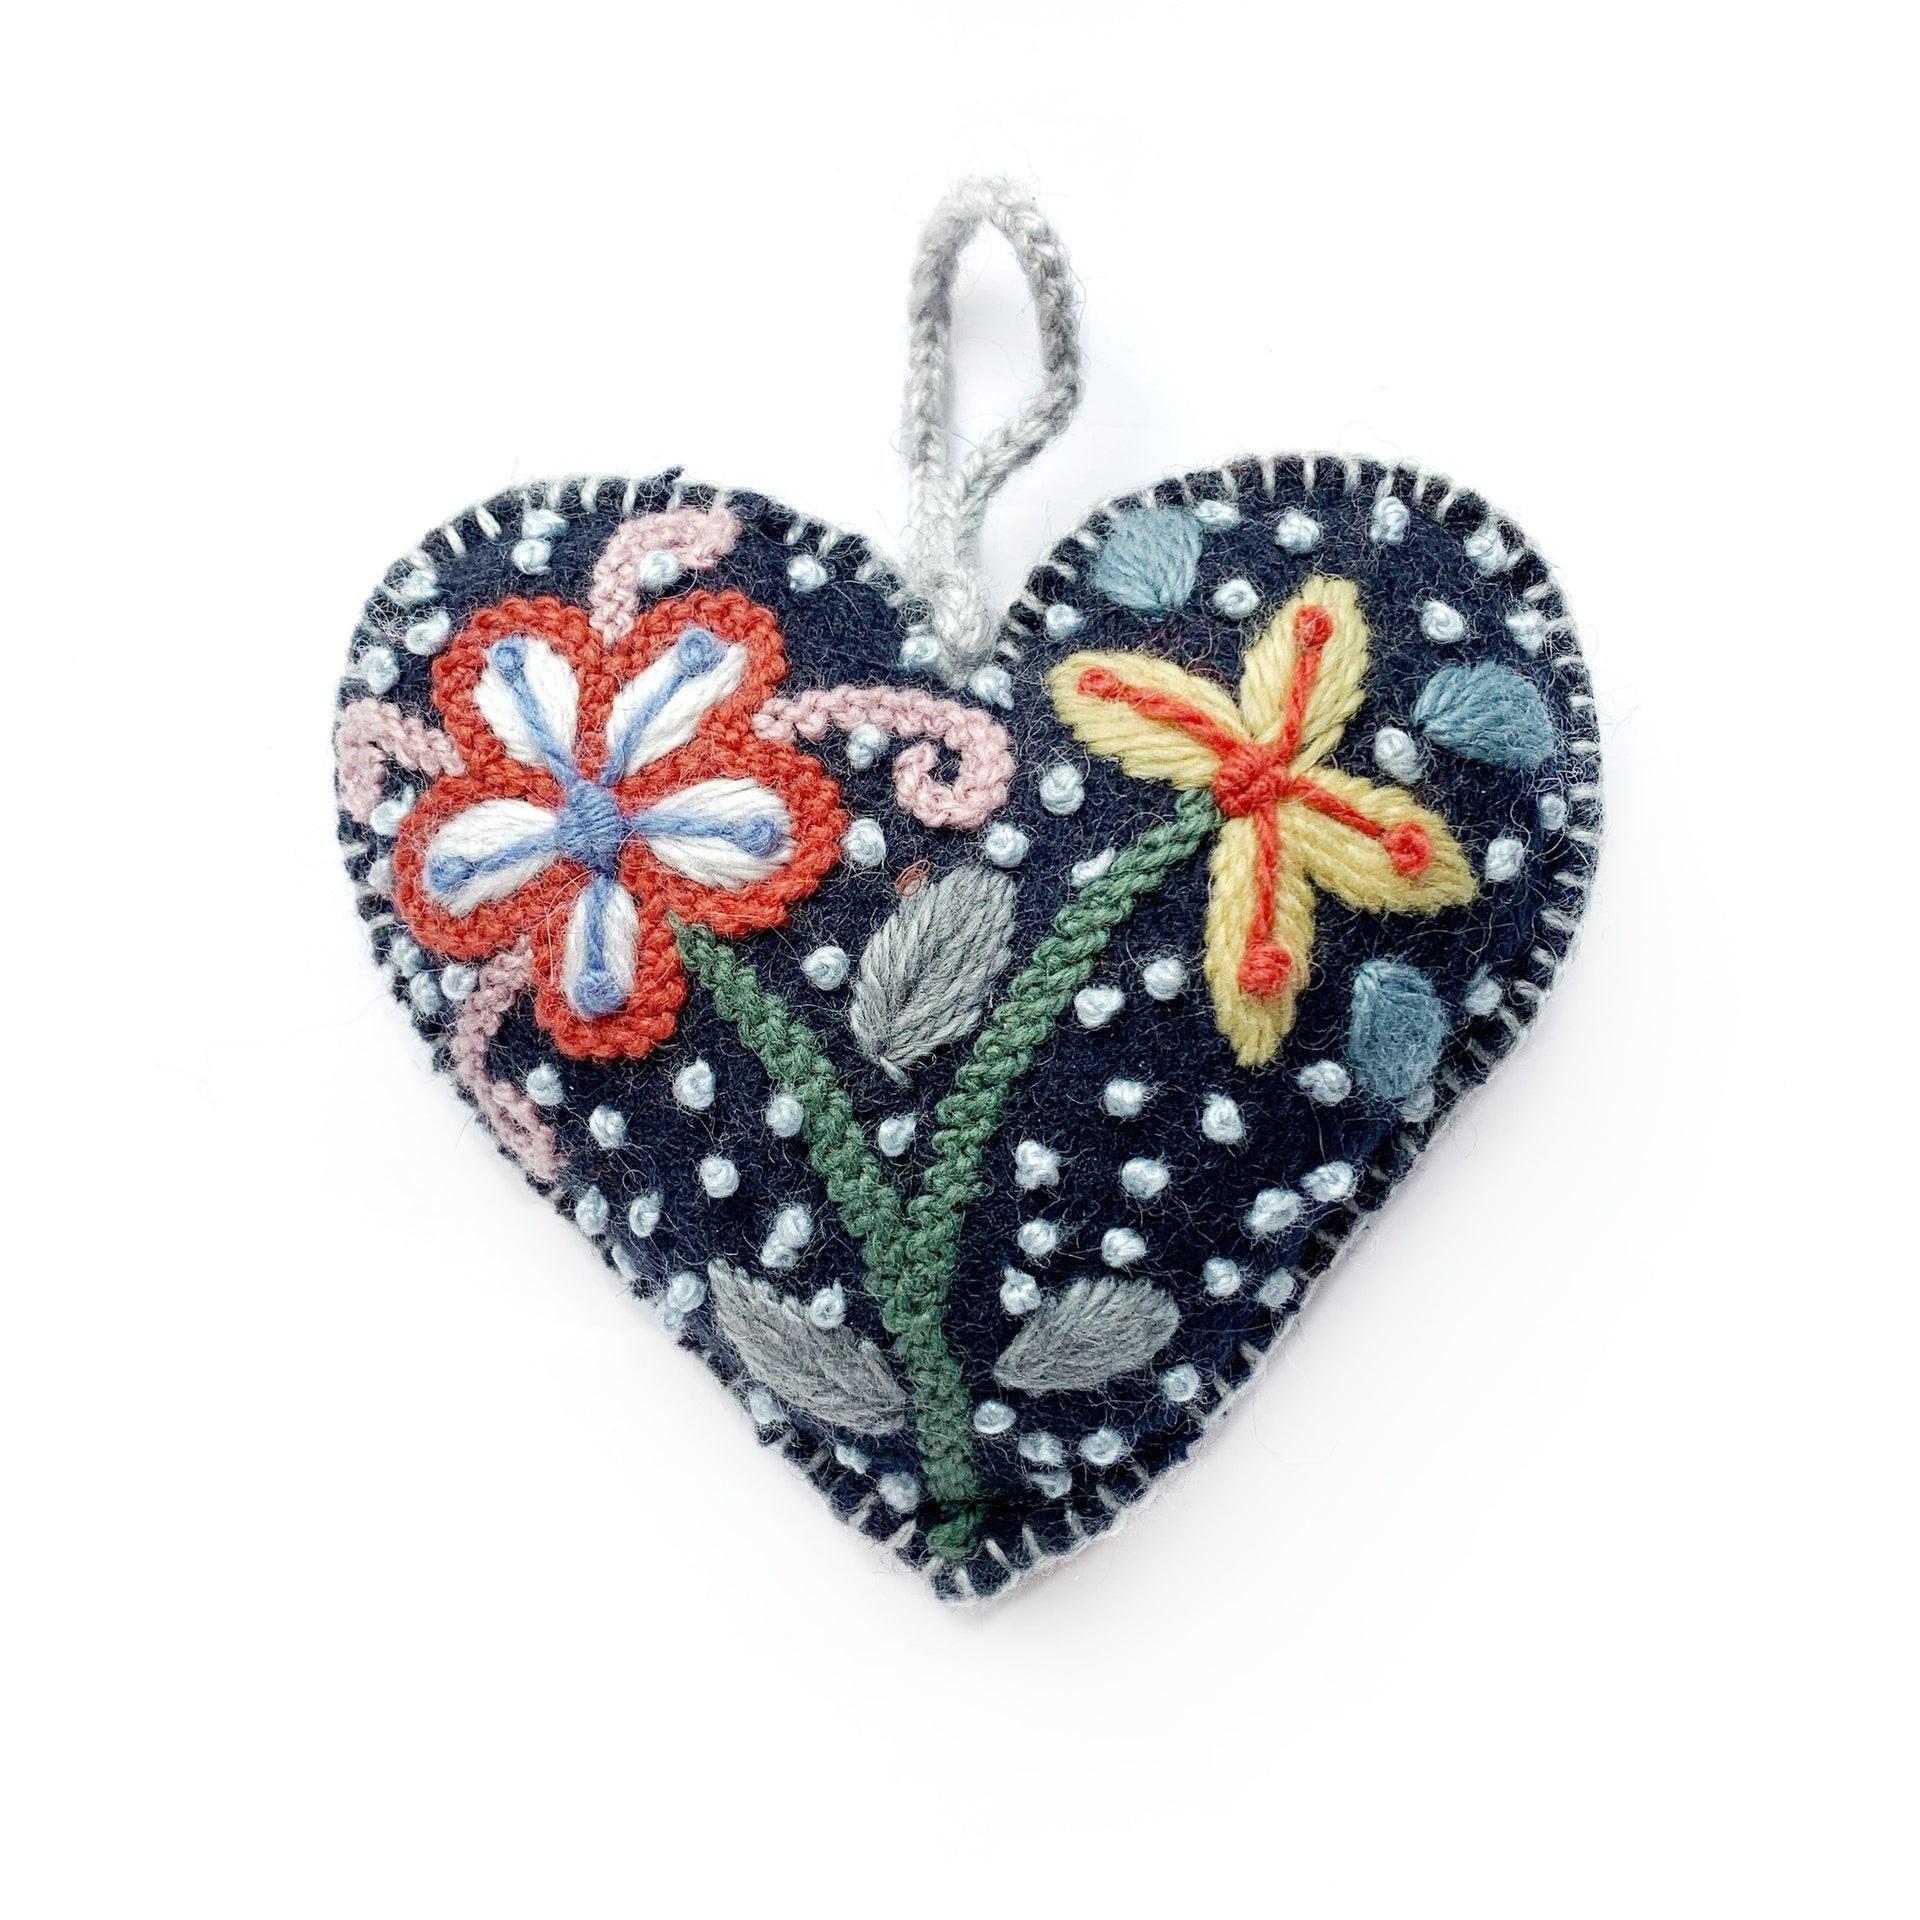 Navy Blue Heart Embroidered Christmas Ornament from Peru Fair Trade